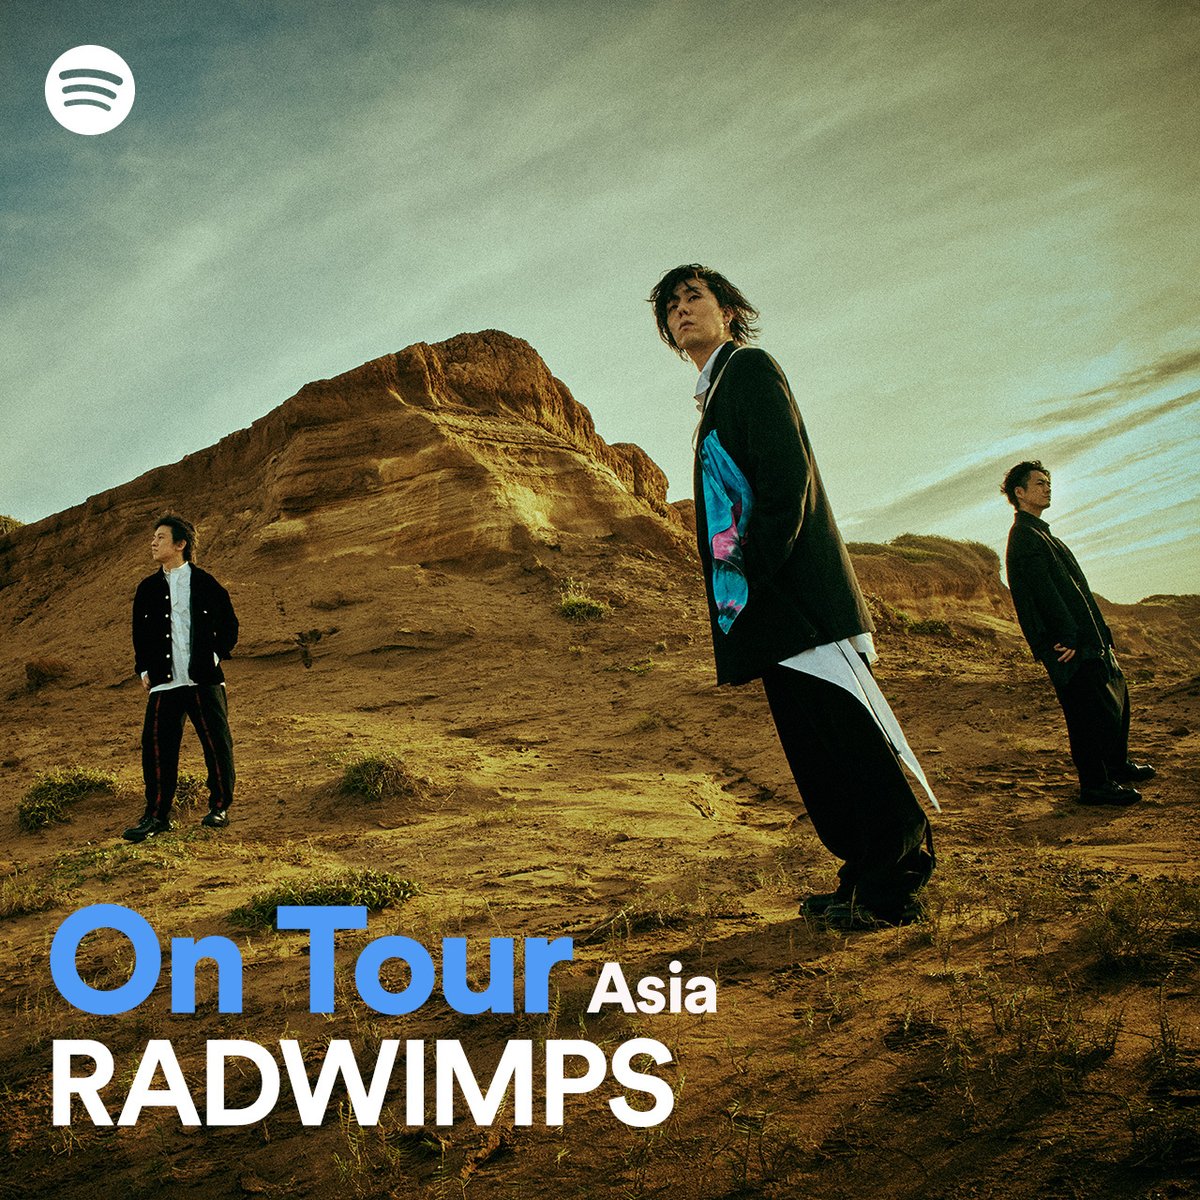 Thank you so much Manila! Spotify “On Tour Asia: RADWIMPS” playlist is updated! Make sure to check it out and get ready for more shows! ▼【On Tour Asia: RADWIMPS】 open.spotify.com/playlist/37i9d… ▼TICKETS radwimps.jp/en/live/14715/ #RADWIMPSWORLDTOUR2024…